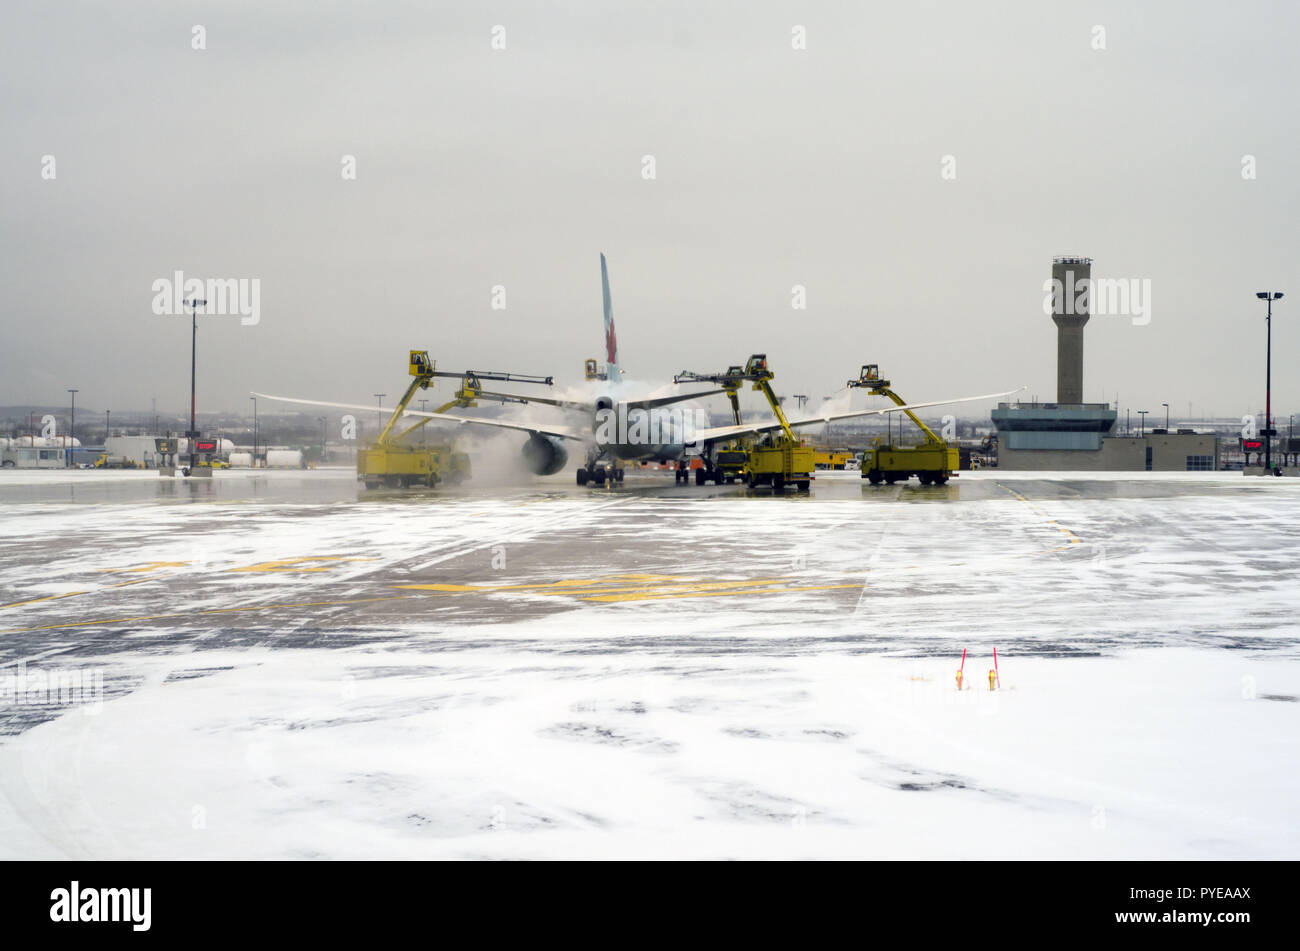 Planes are lining up on the snowy runway in Toronto airport (YYZ), the biggest de-icing station in the world, to get treated before take off. Stock Photo